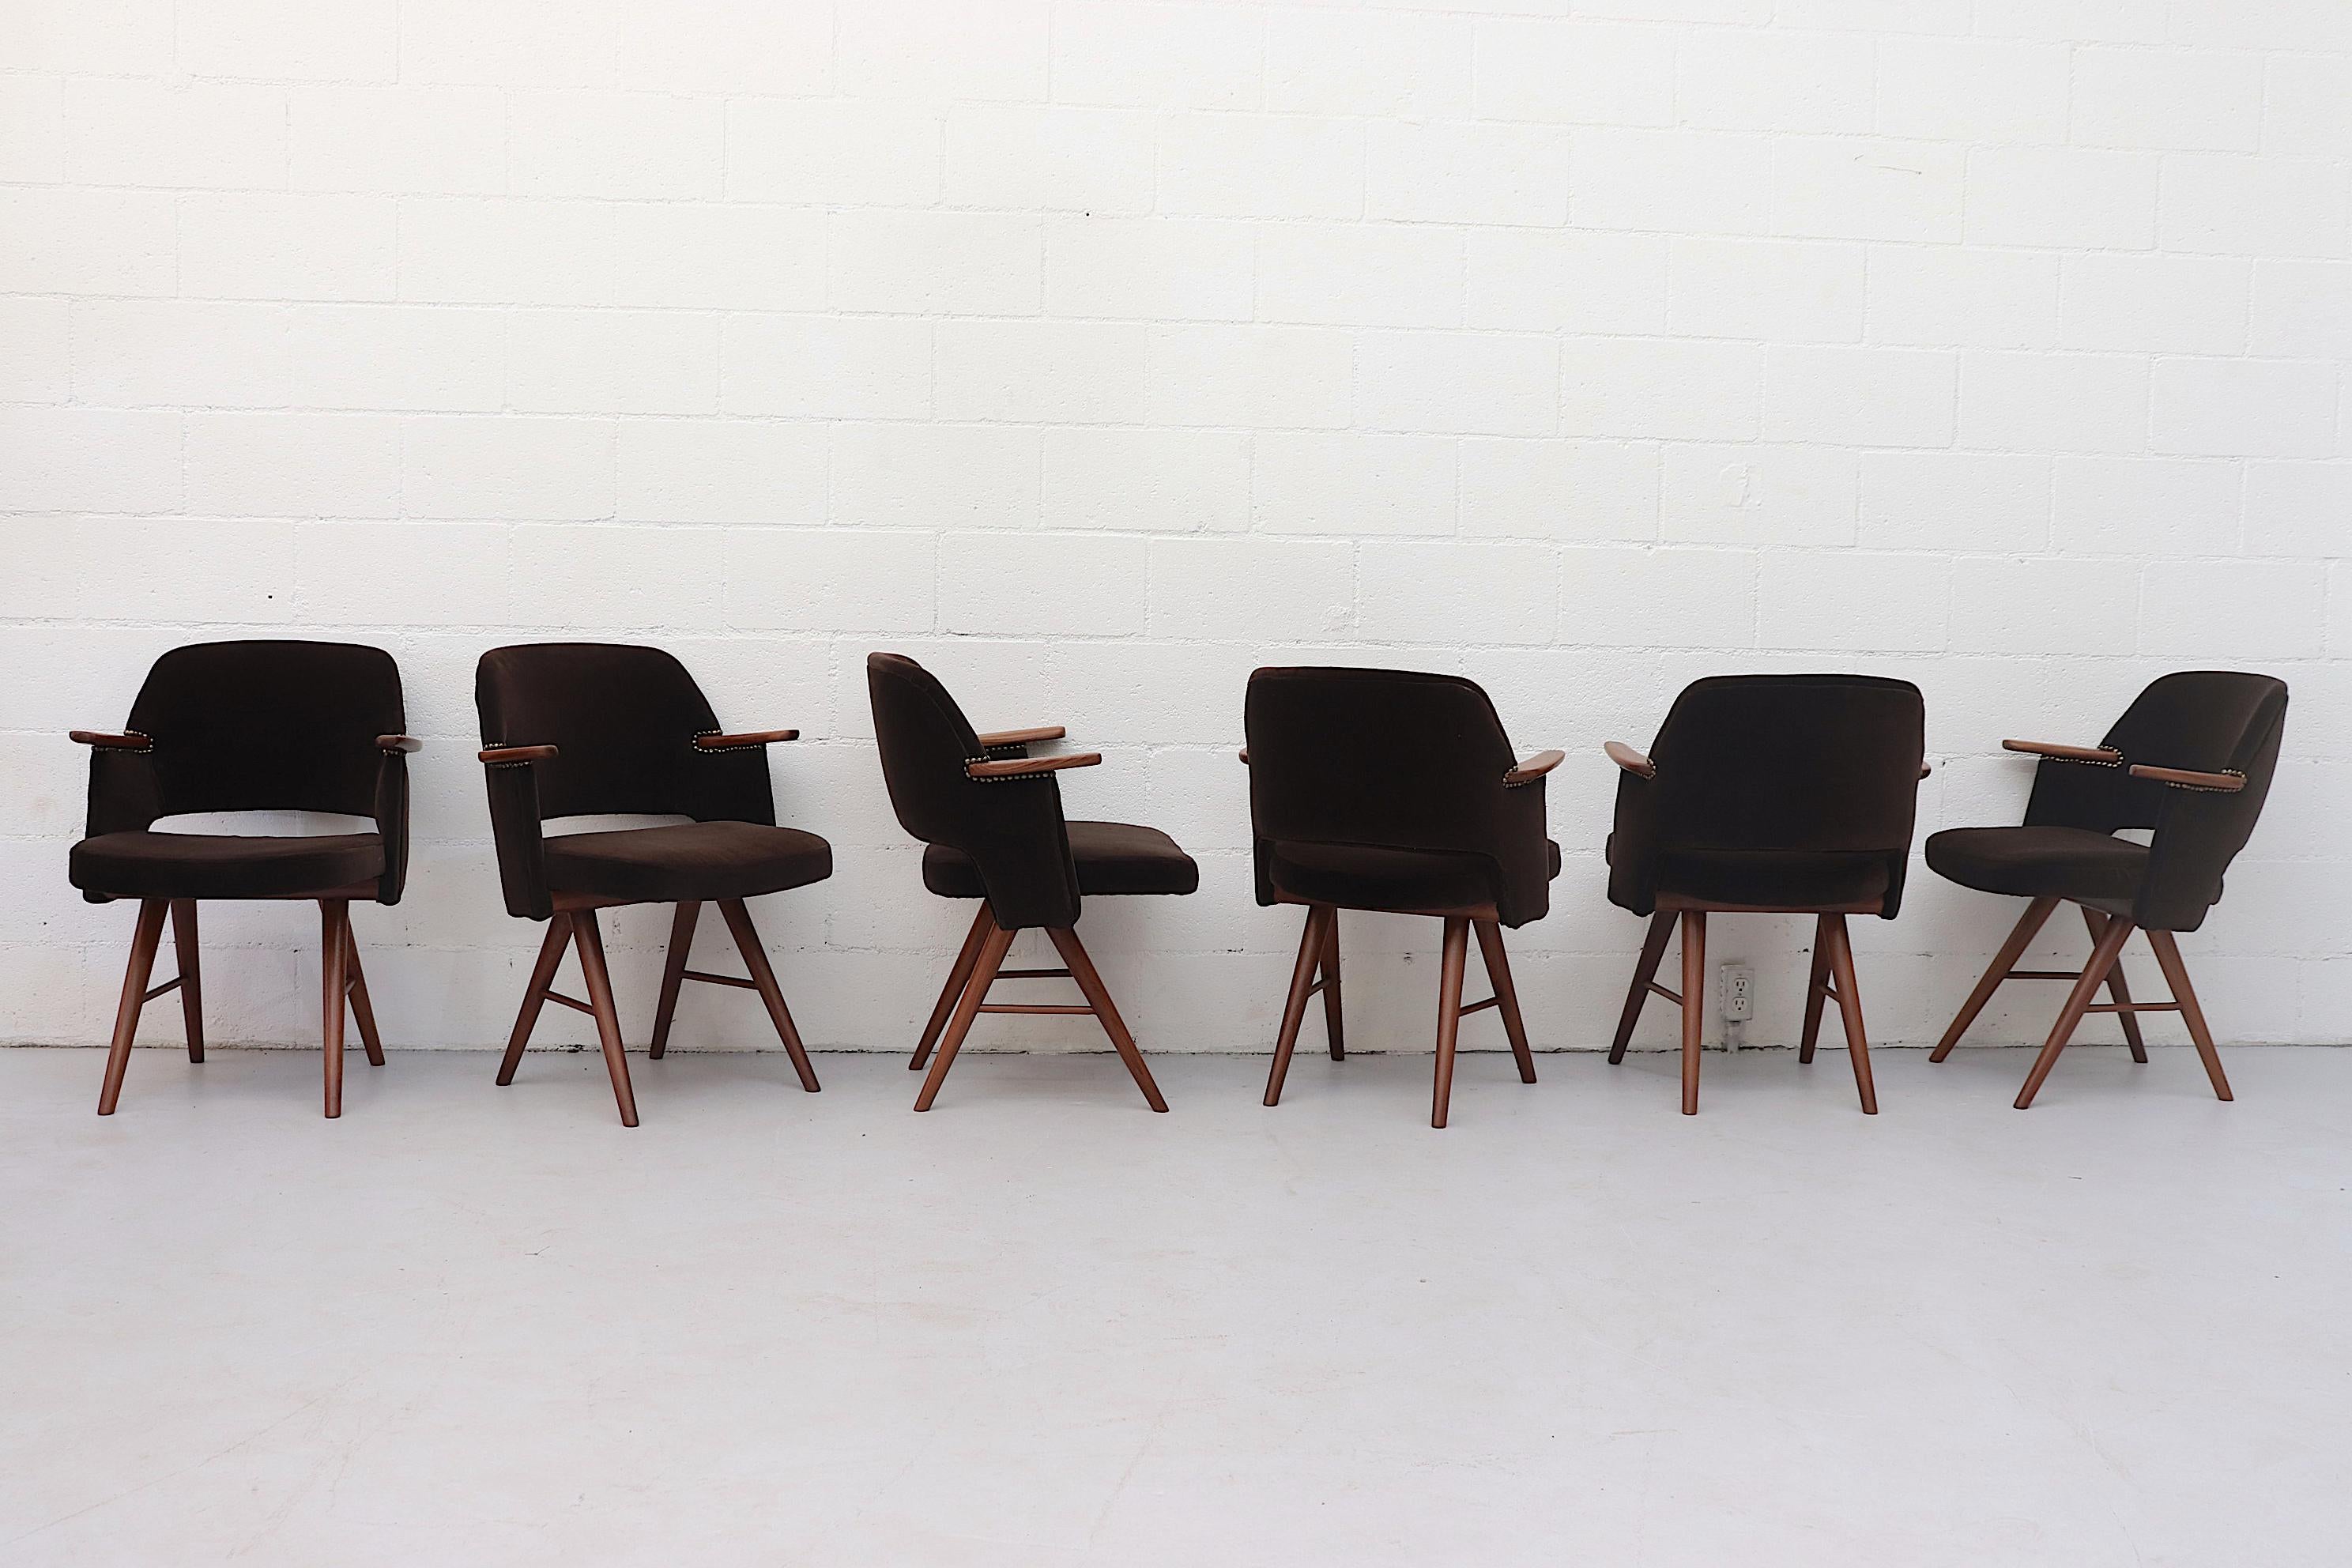 Gorgeous set of 6 mahogany velvet FT30 dining chairs with brass stud accents by Cees Braakman for Pastoe. Newly re-upholstery seating with lightly refinished teak arm rests and tapered teak legs. Good original condition with wear consistent with age